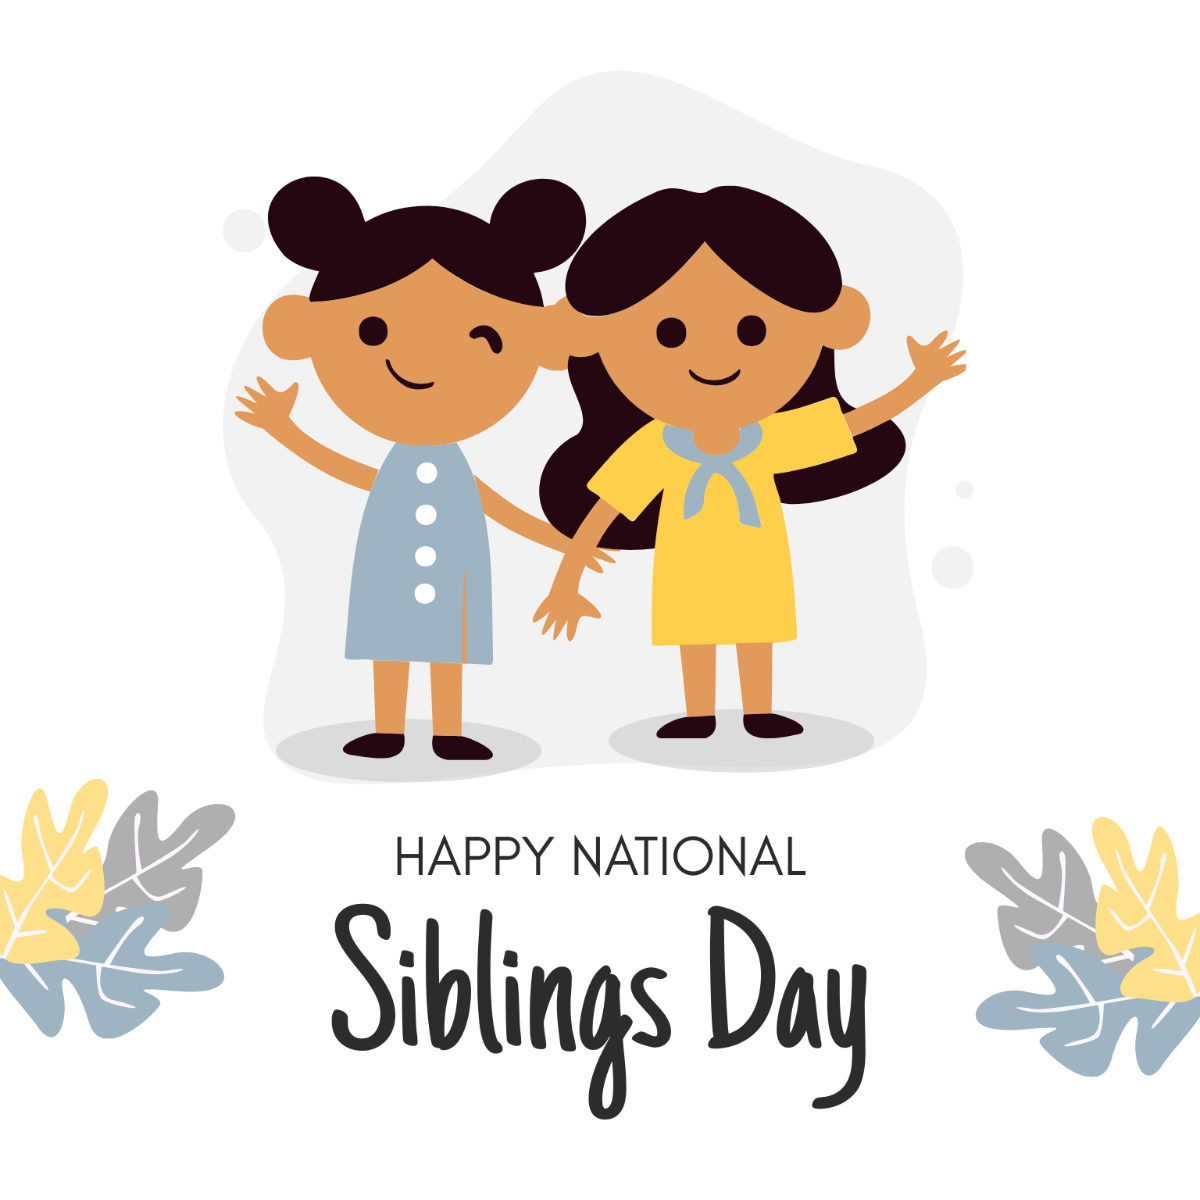 Happy National Siblings Day Vector Template